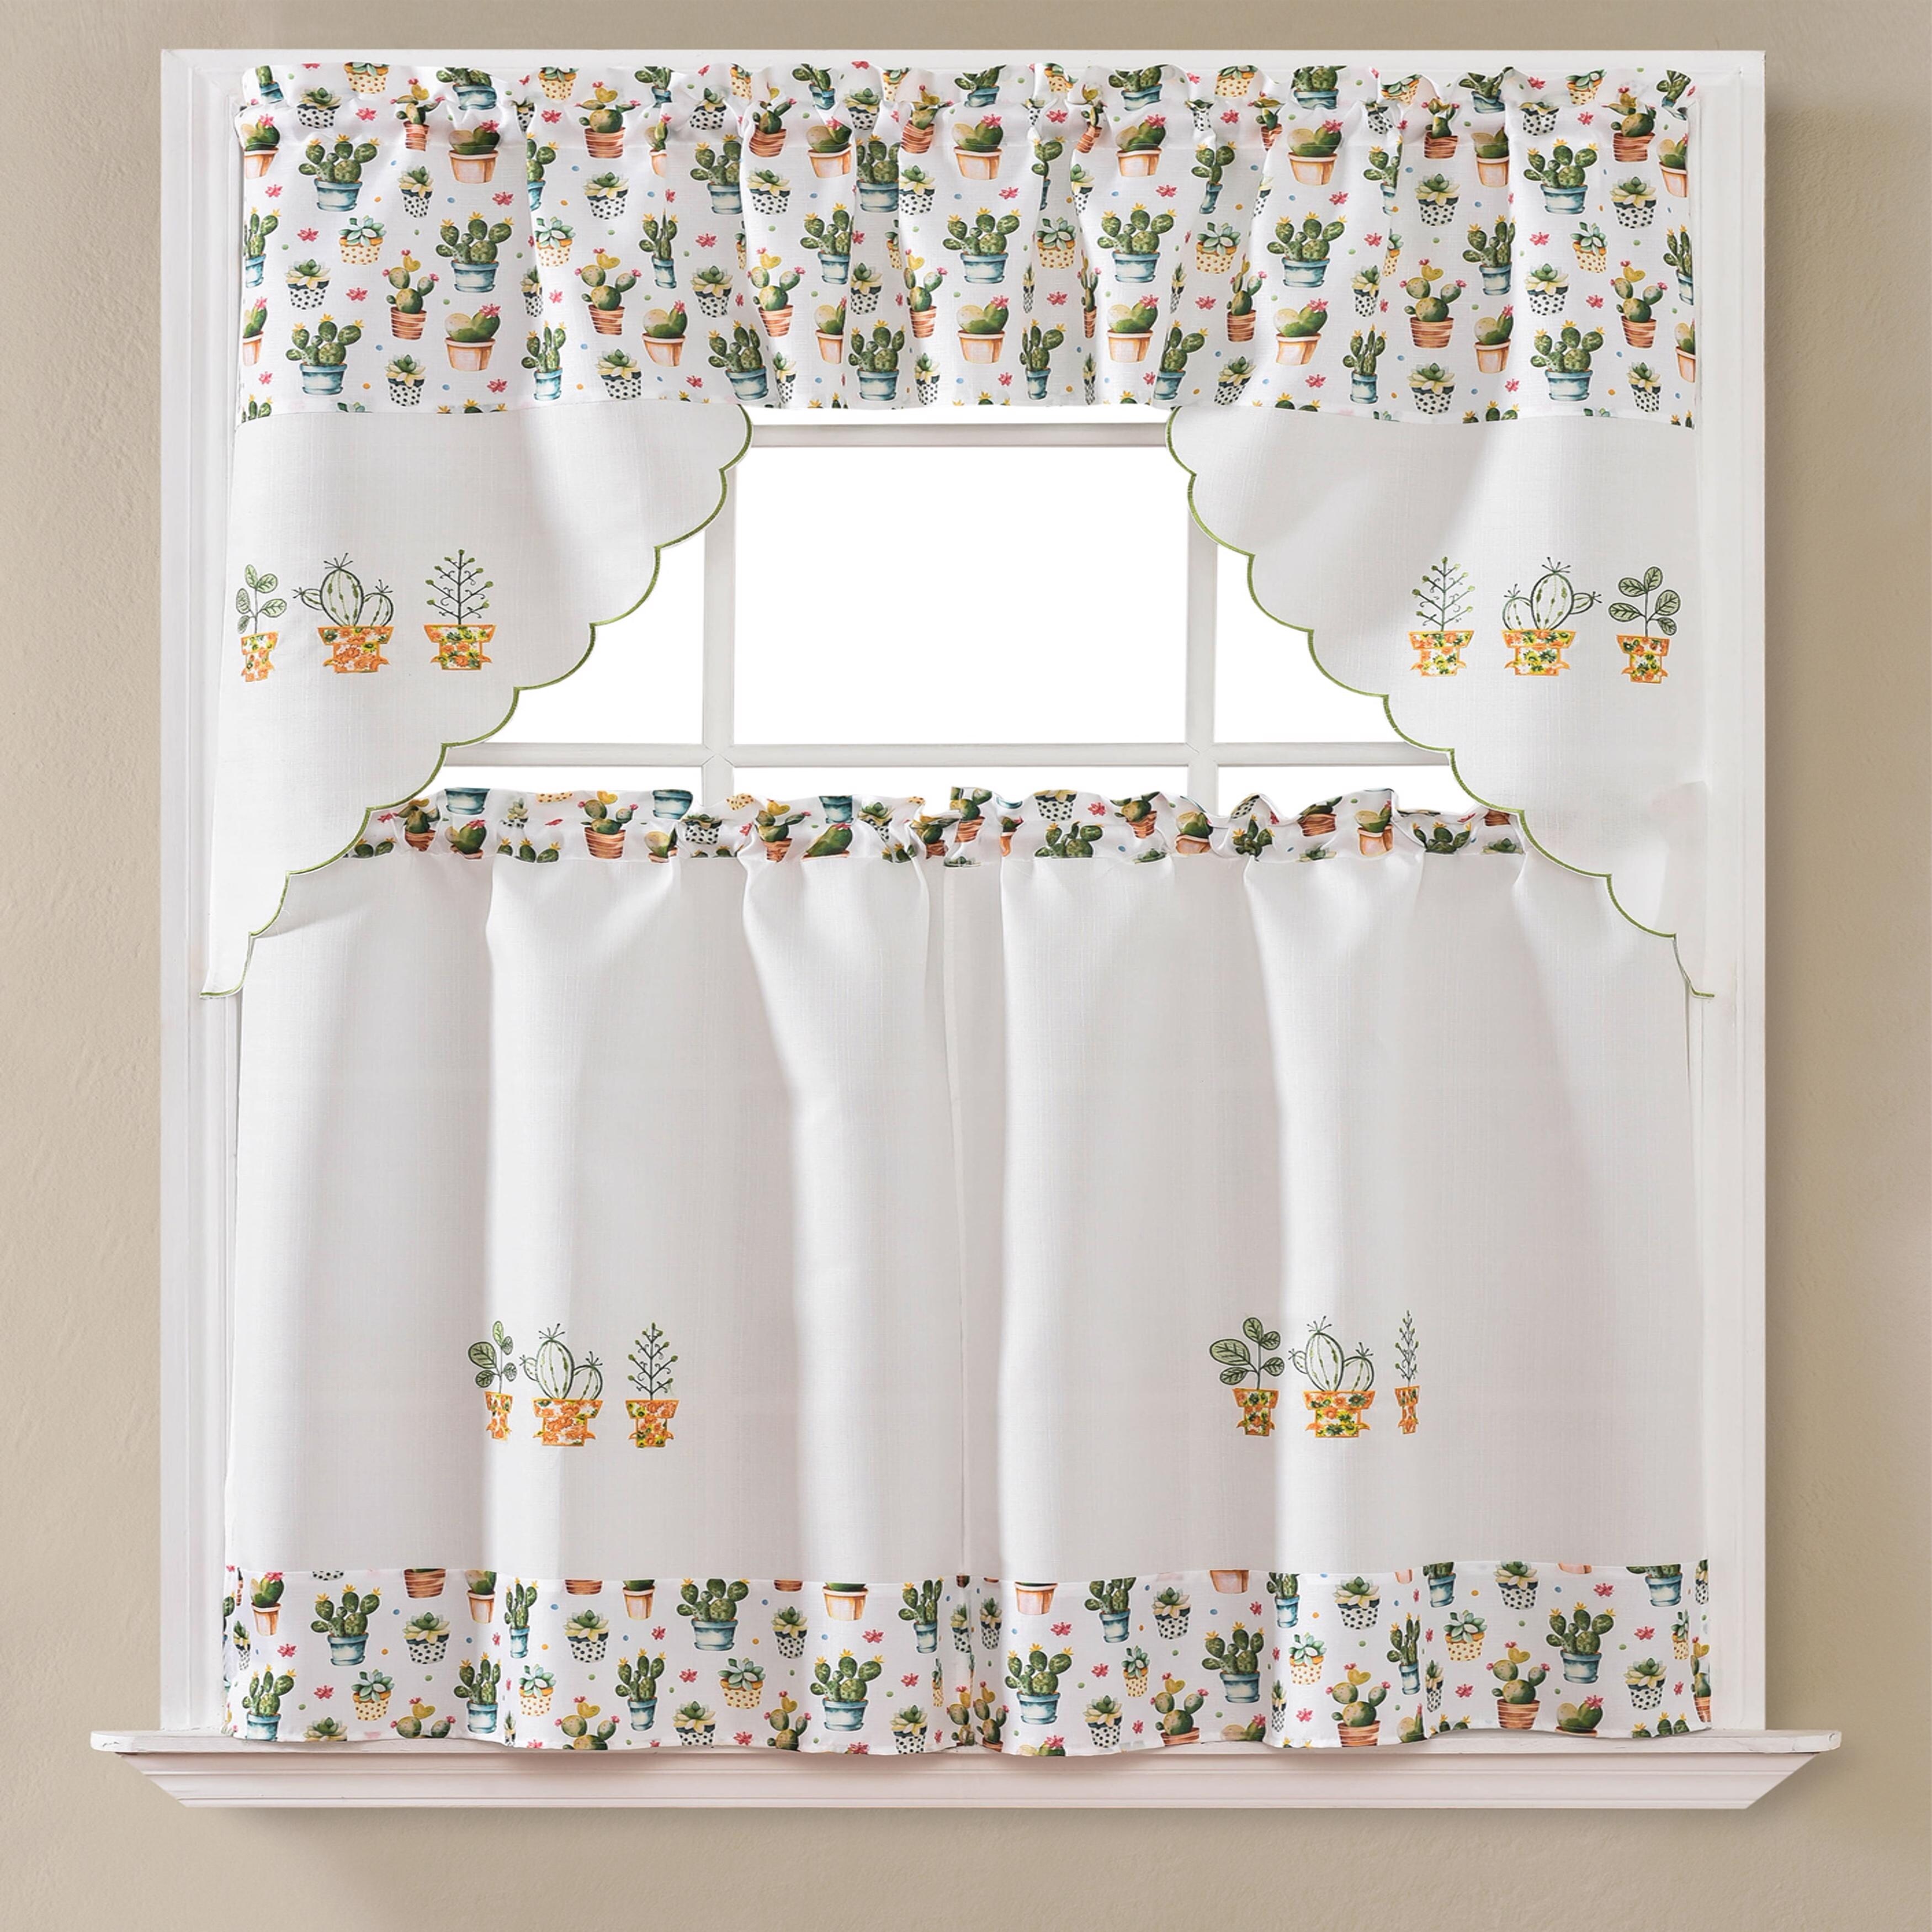 https://ak1.ostkcdn.com/images/products/is/images/direct/1f003343a9c4ec57cd2301e8acad28a76d803055/Urban-Cactus-Printed-%26-Embroidered-Kitchen-Curtain-Set.jpg